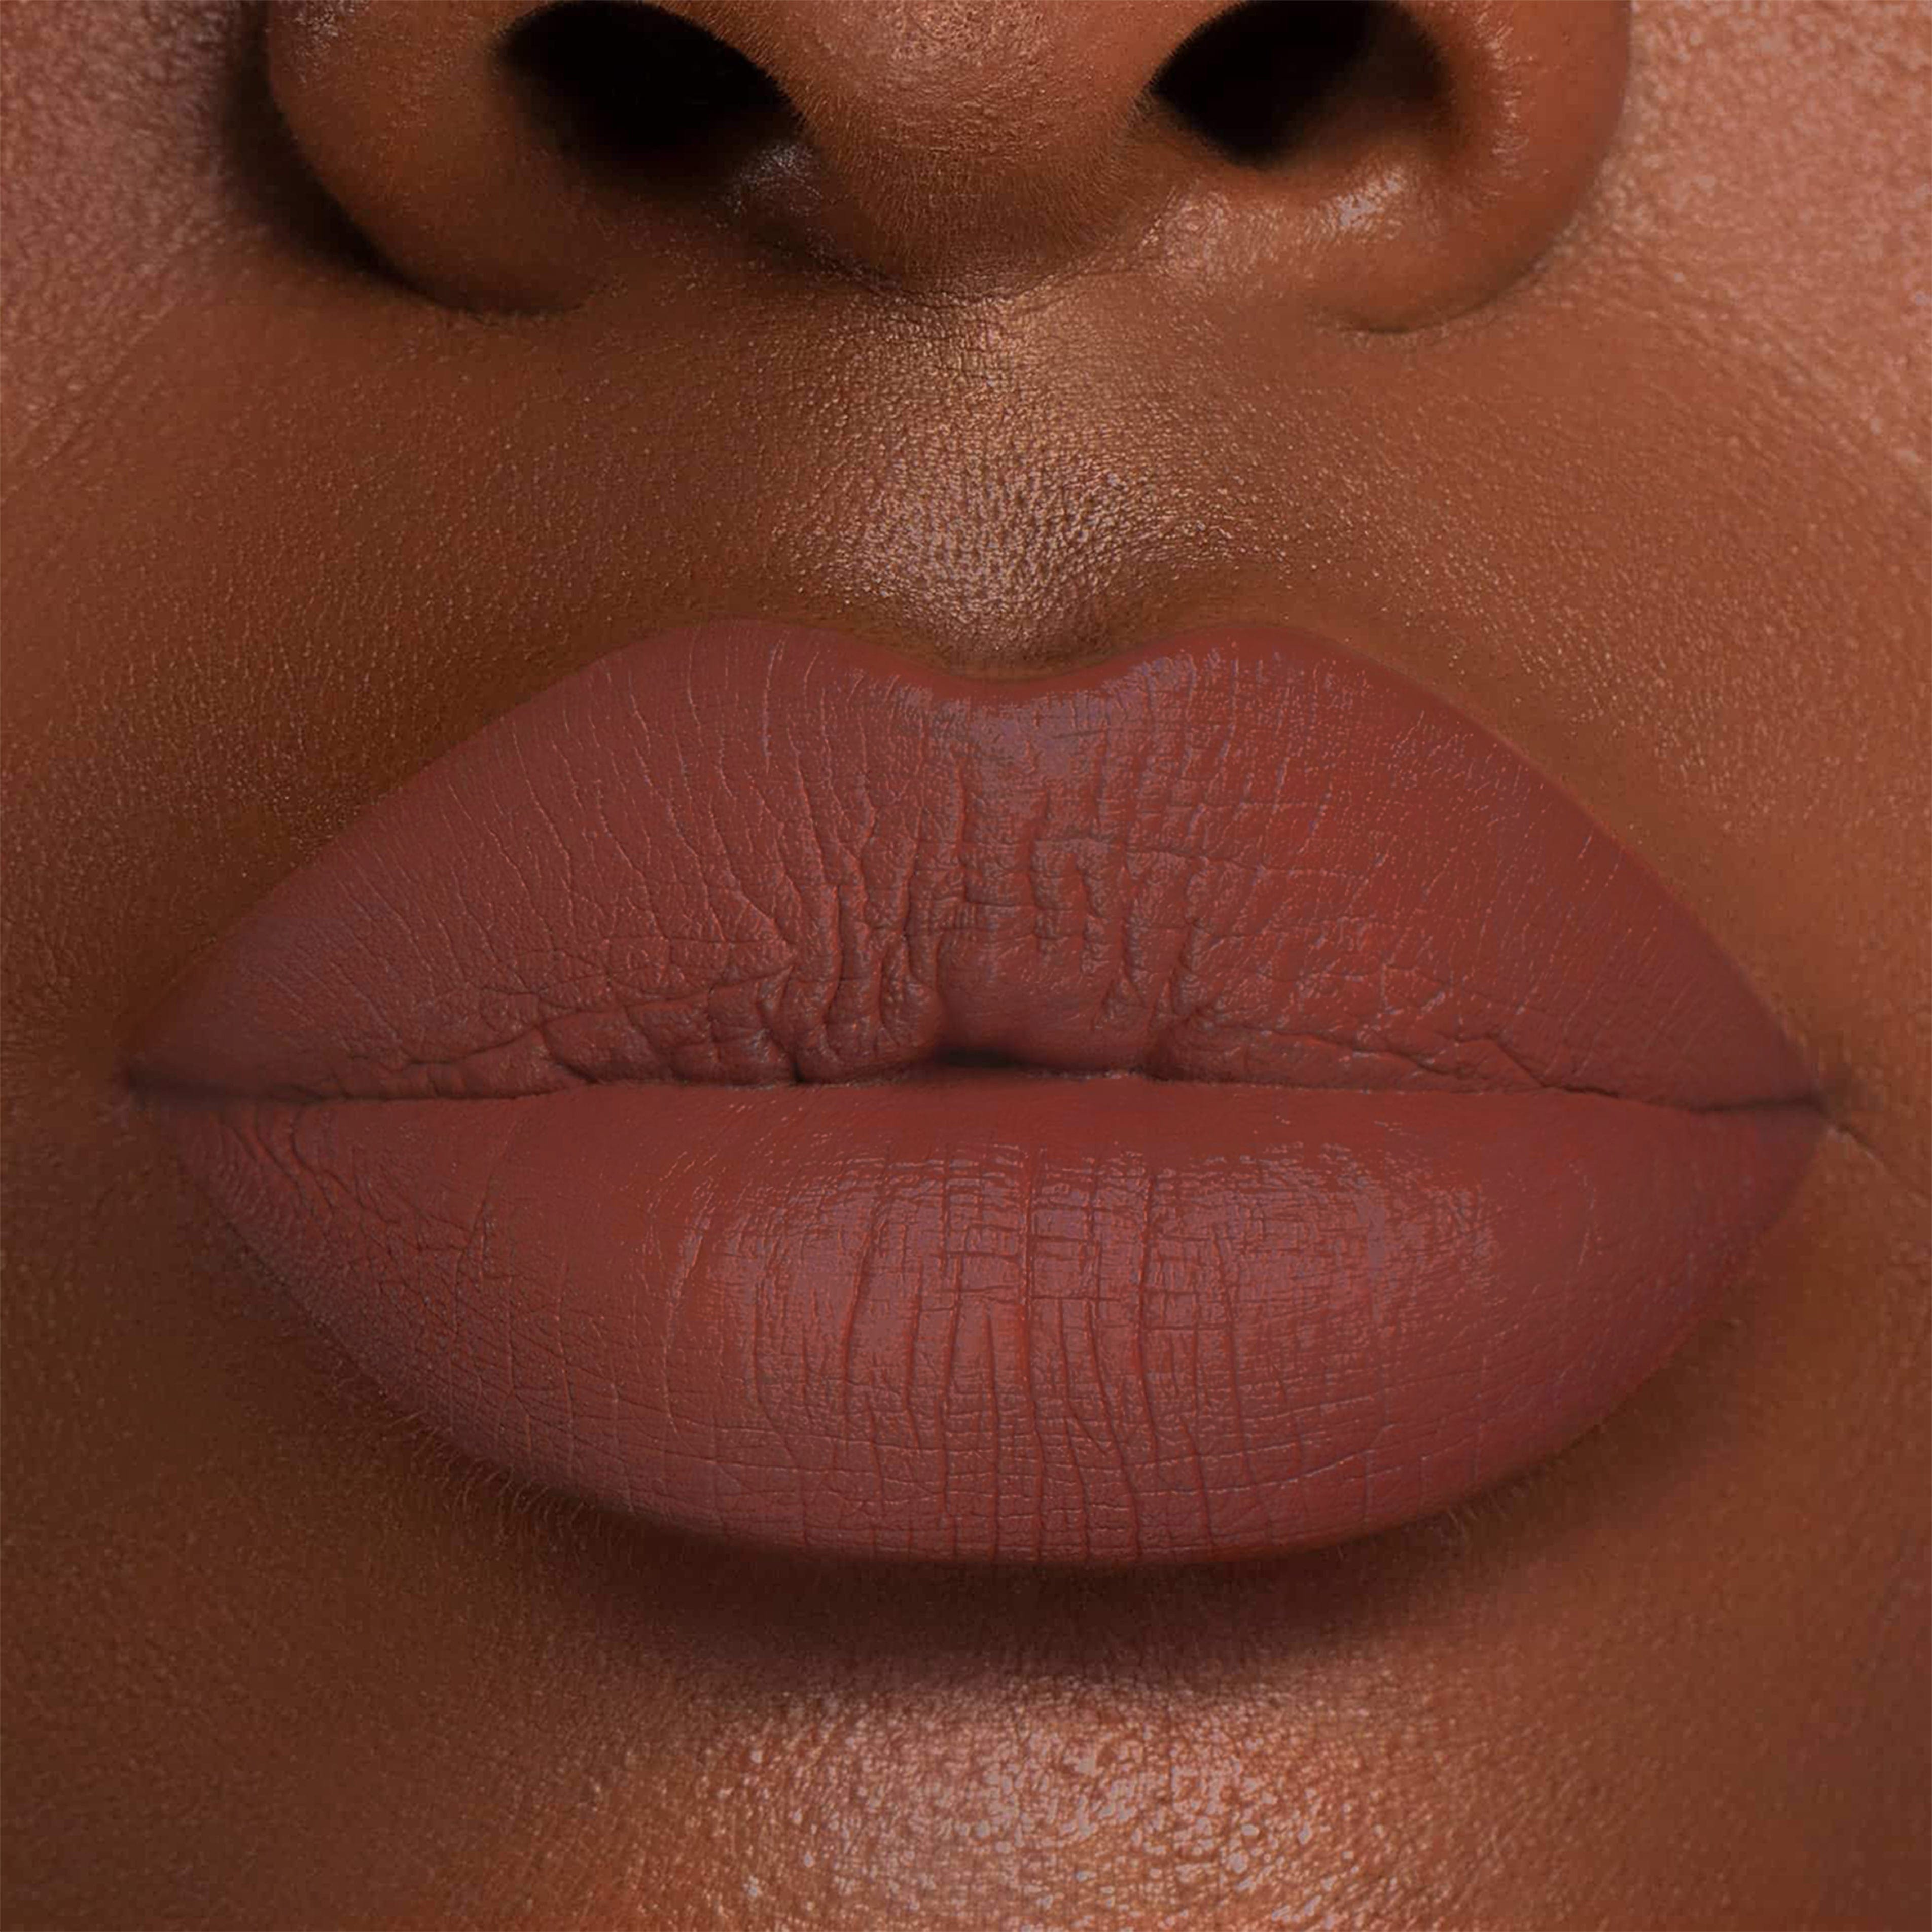 Ambitious is a vegan mattifying lipstick that's made with quality ingredients for long-lasting color and comfort. With its oil-absorbing properties, it'll provide yo